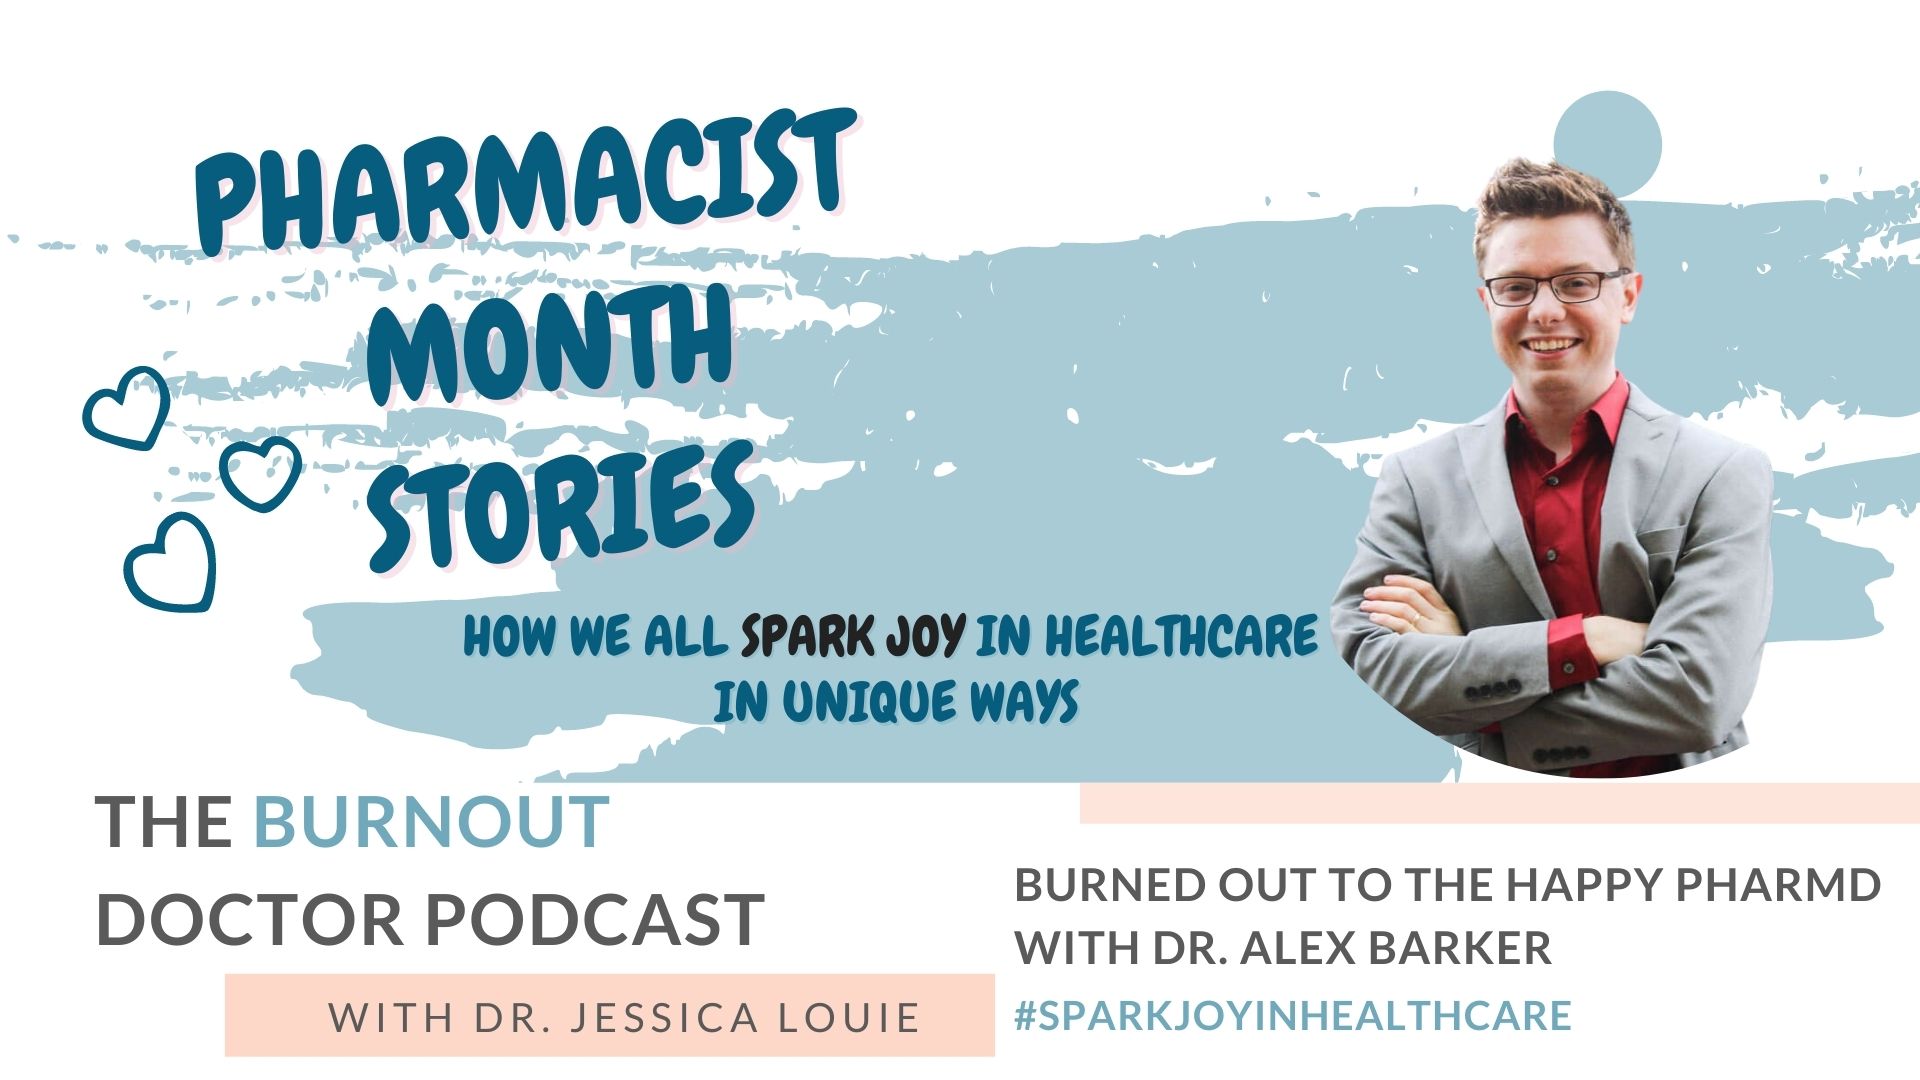 Dr. Alex Barker from The Happy PharmD on The Burnout Doctor Podcast with Dr. Jessica Louie. Indispensable Pharmacist. Pharmacist burnout coaching. KonMari simplifying healthcare families. Clarify Simplify Align Method. Joy at work. #joyatwork